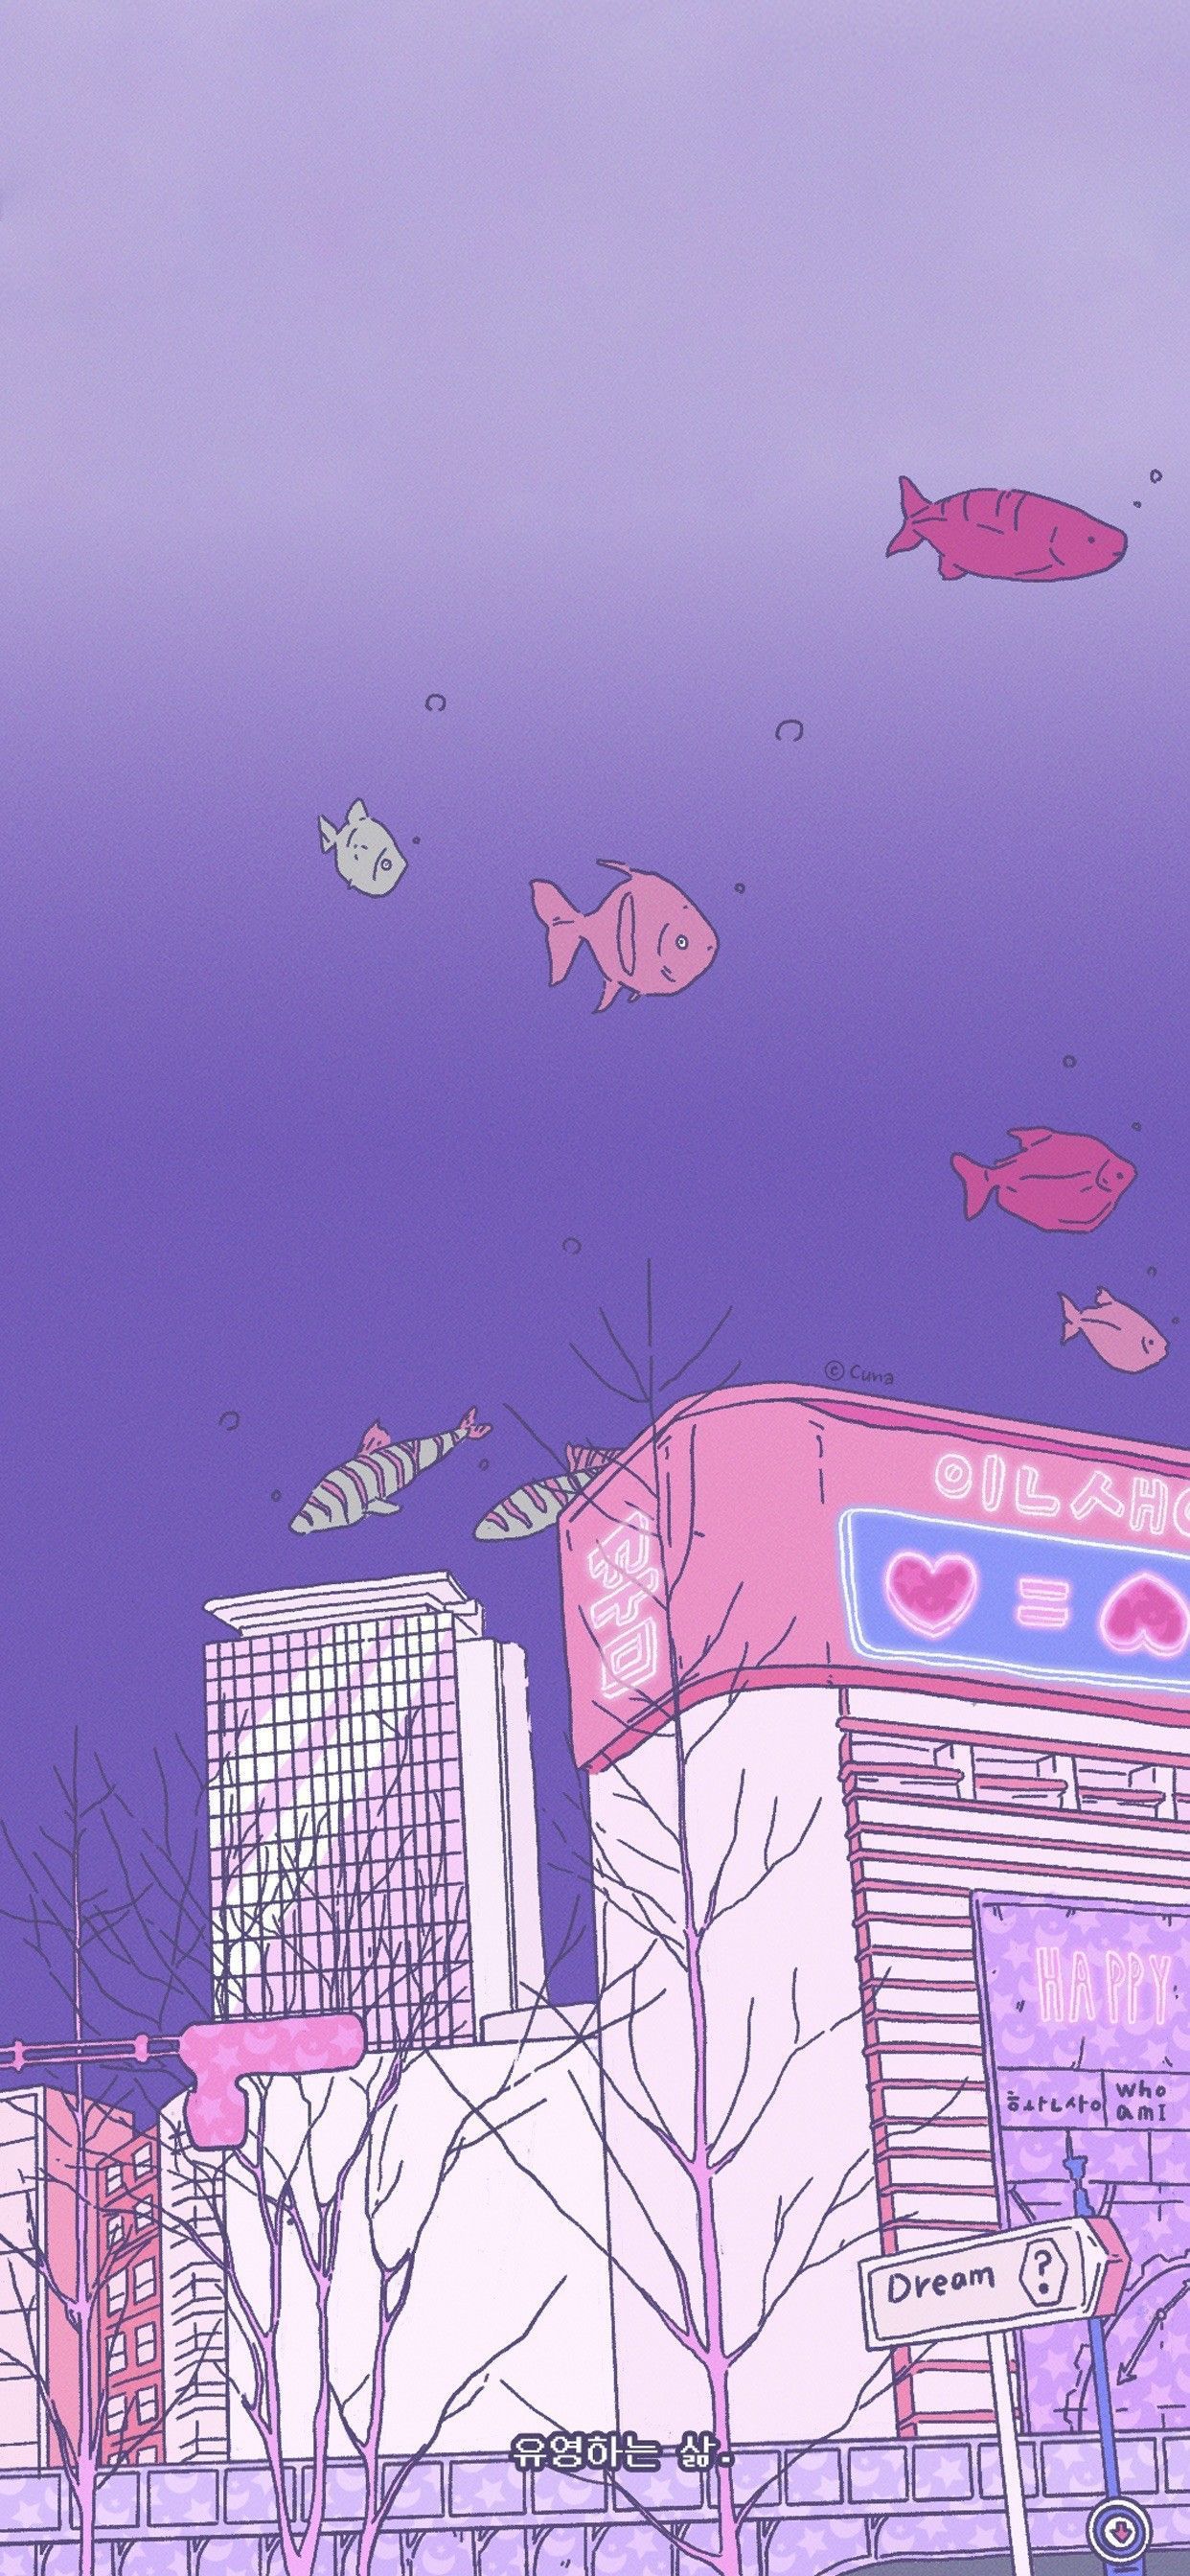 Aesthetic anime purple background with pink fish - 90s anime, 90s